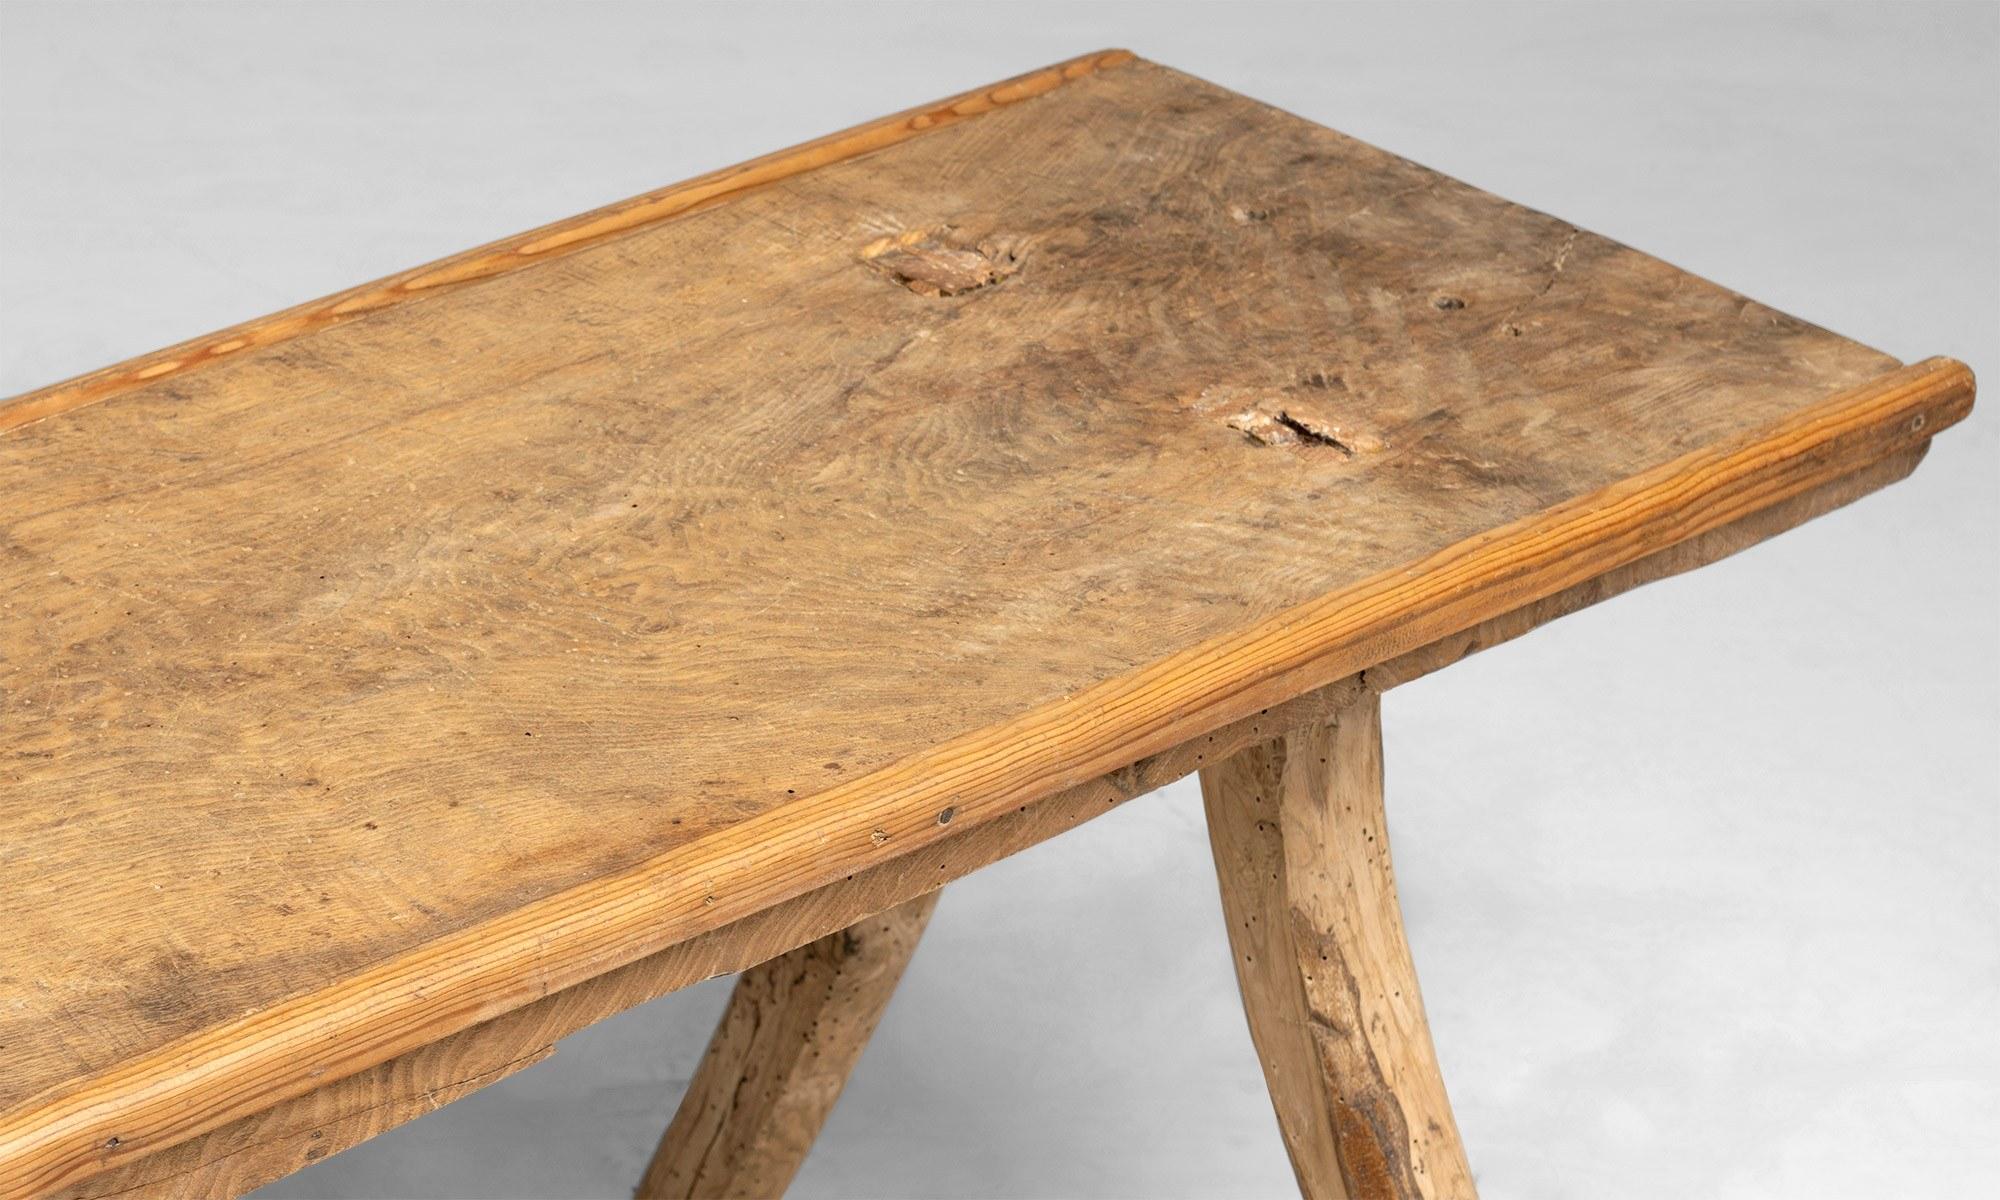 Ash Tripod Table

Spain circa 1890

Three-legged primitive side table constructed from ash.

Measures: 52”L x 25.5”D x 23.75” H.